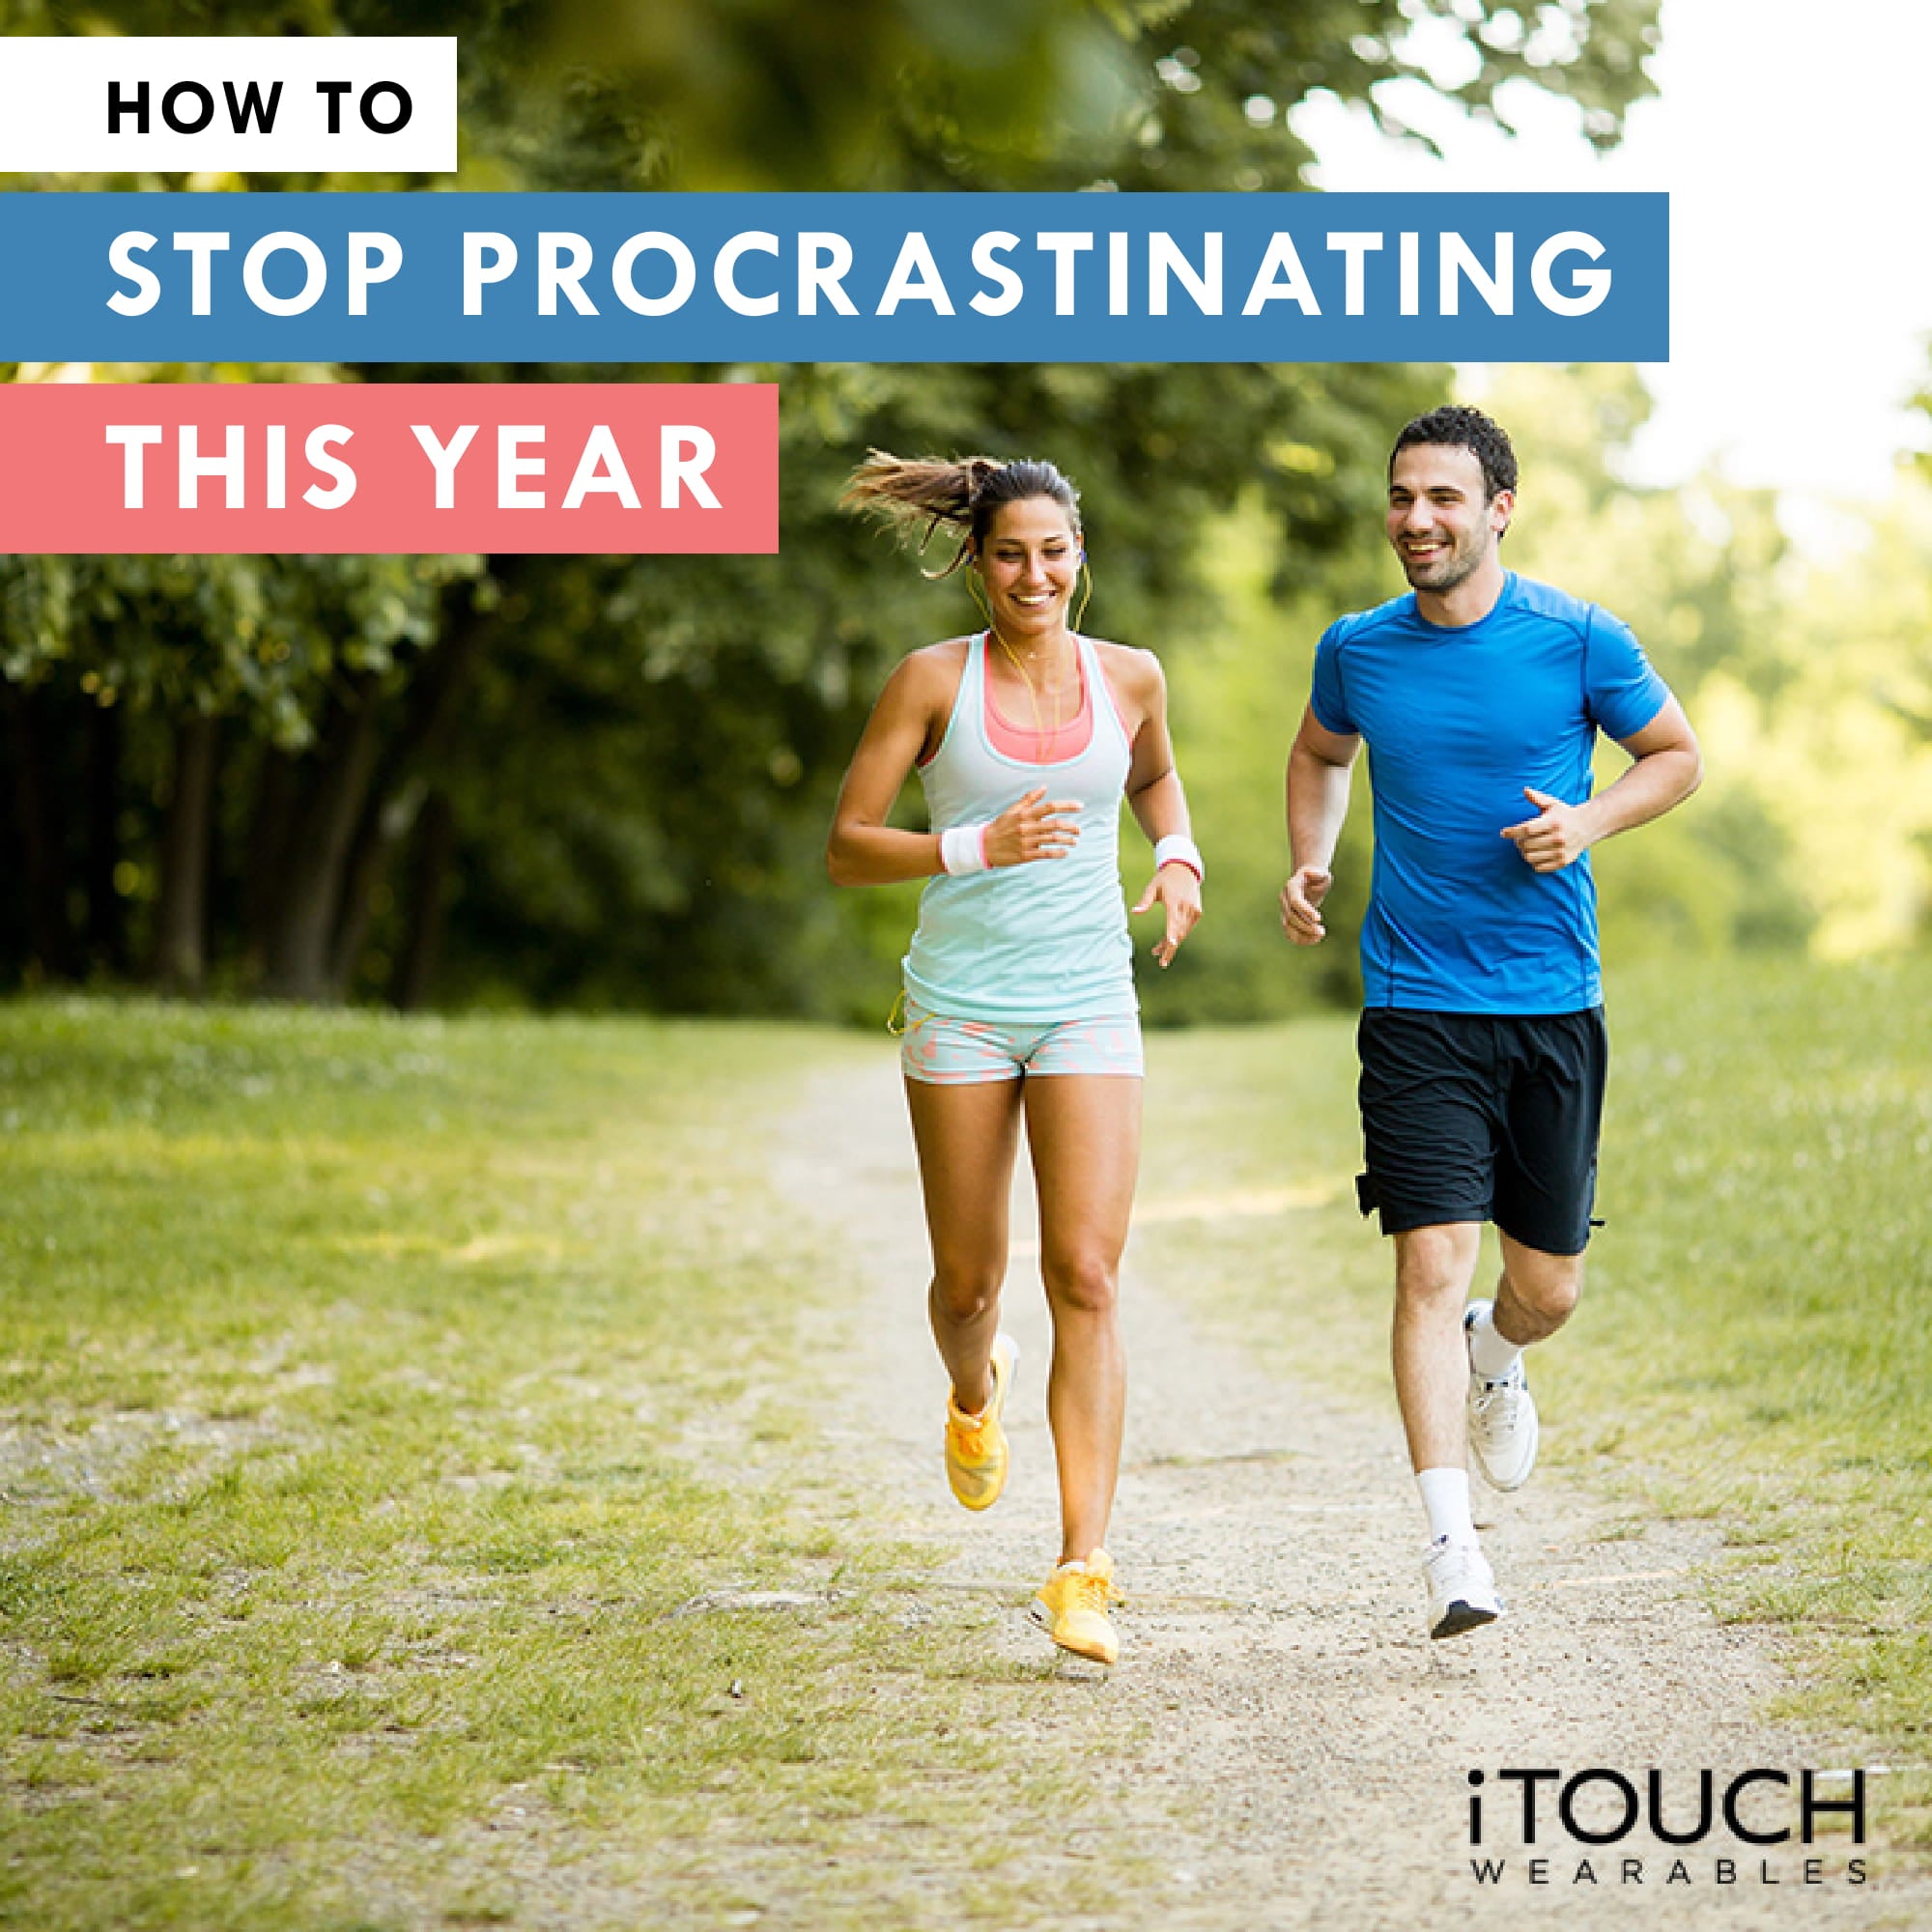 How To Stop Procrastinating This Year